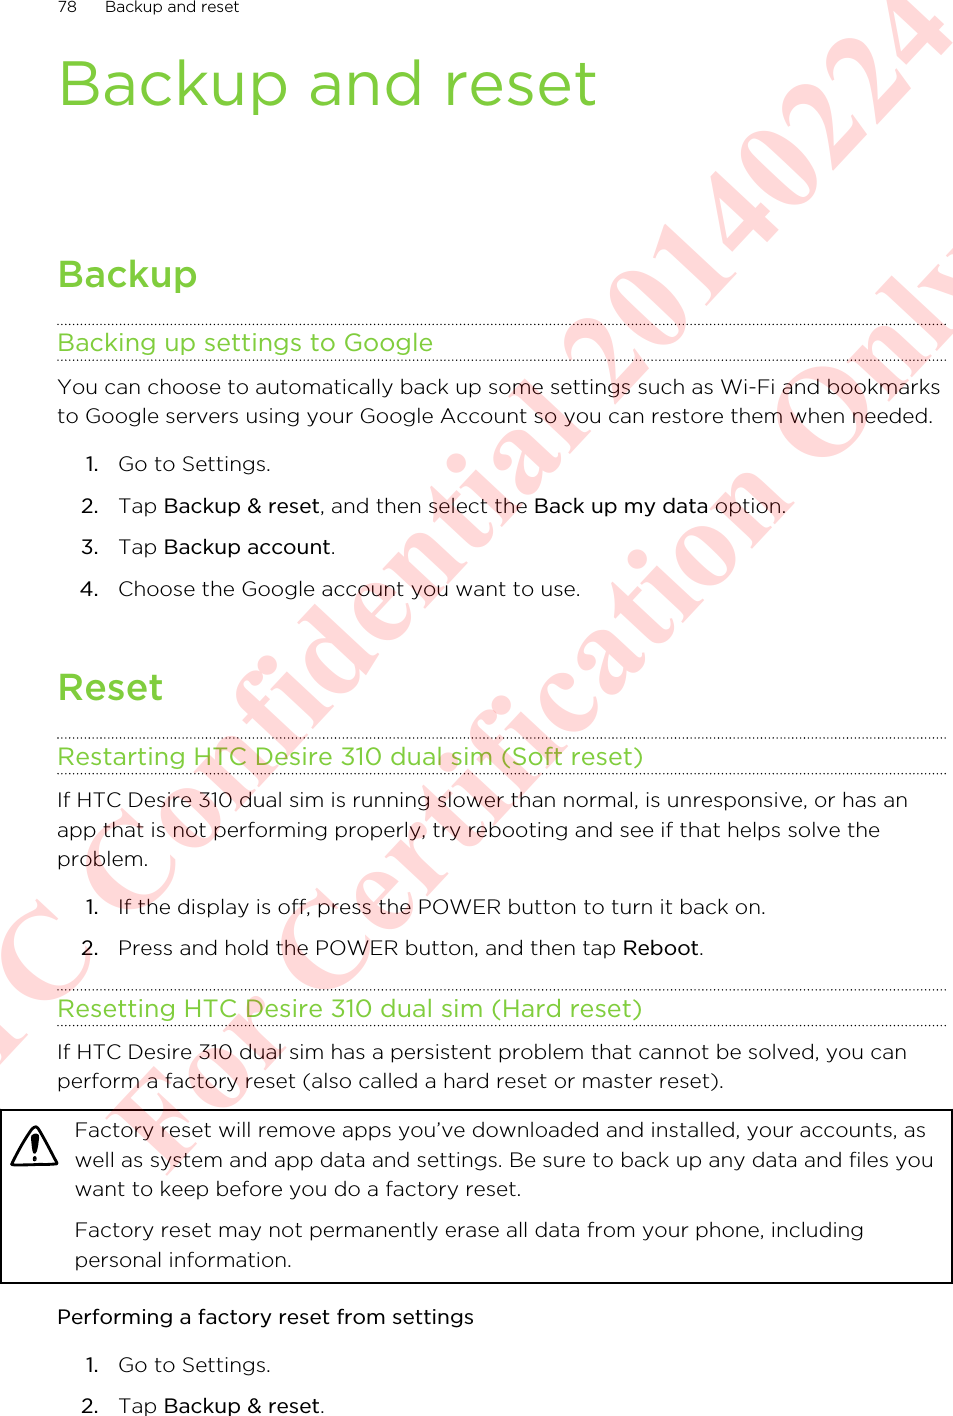 Backup and resetBackupBacking up settings to GoogleYou can choose to automatically back up some settings such as Wi-Fi and bookmarksto Google servers using your Google Account so you can restore them when needed.1. Go to Settings.2. Tap Backup &amp; reset, and then select the Back up my data option.3. Tap Backup account.4. Choose the Google account you want to use.ResetRestarting HTC Desire 310 dual sim (Soft reset)If HTC Desire 310 dual sim is running slower than normal, is unresponsive, or has anapp that is not performing properly, try rebooting and see if that helps solve theproblem.1. If the display is off, press the POWER button to turn it back on.2. Press and hold the POWER button, and then tap Reboot.Resetting HTC Desire 310 dual sim (Hard reset)If HTC Desire 310 dual sim has a persistent problem that cannot be solved, you canperform a factory reset (also called a hard reset or master reset).Factory reset will remove apps you’ve downloaded and installed, your accounts, aswell as system and app data and settings. Be sure to back up any data and files youwant to keep before you do a factory reset.Factory reset may not permanently erase all data from your phone, includingpersonal information.Performing a factory reset from settings1. Go to Settings.2. Tap Backup &amp; reset.78 Backup and resetHTC Confidential 20140224 For Certification Only